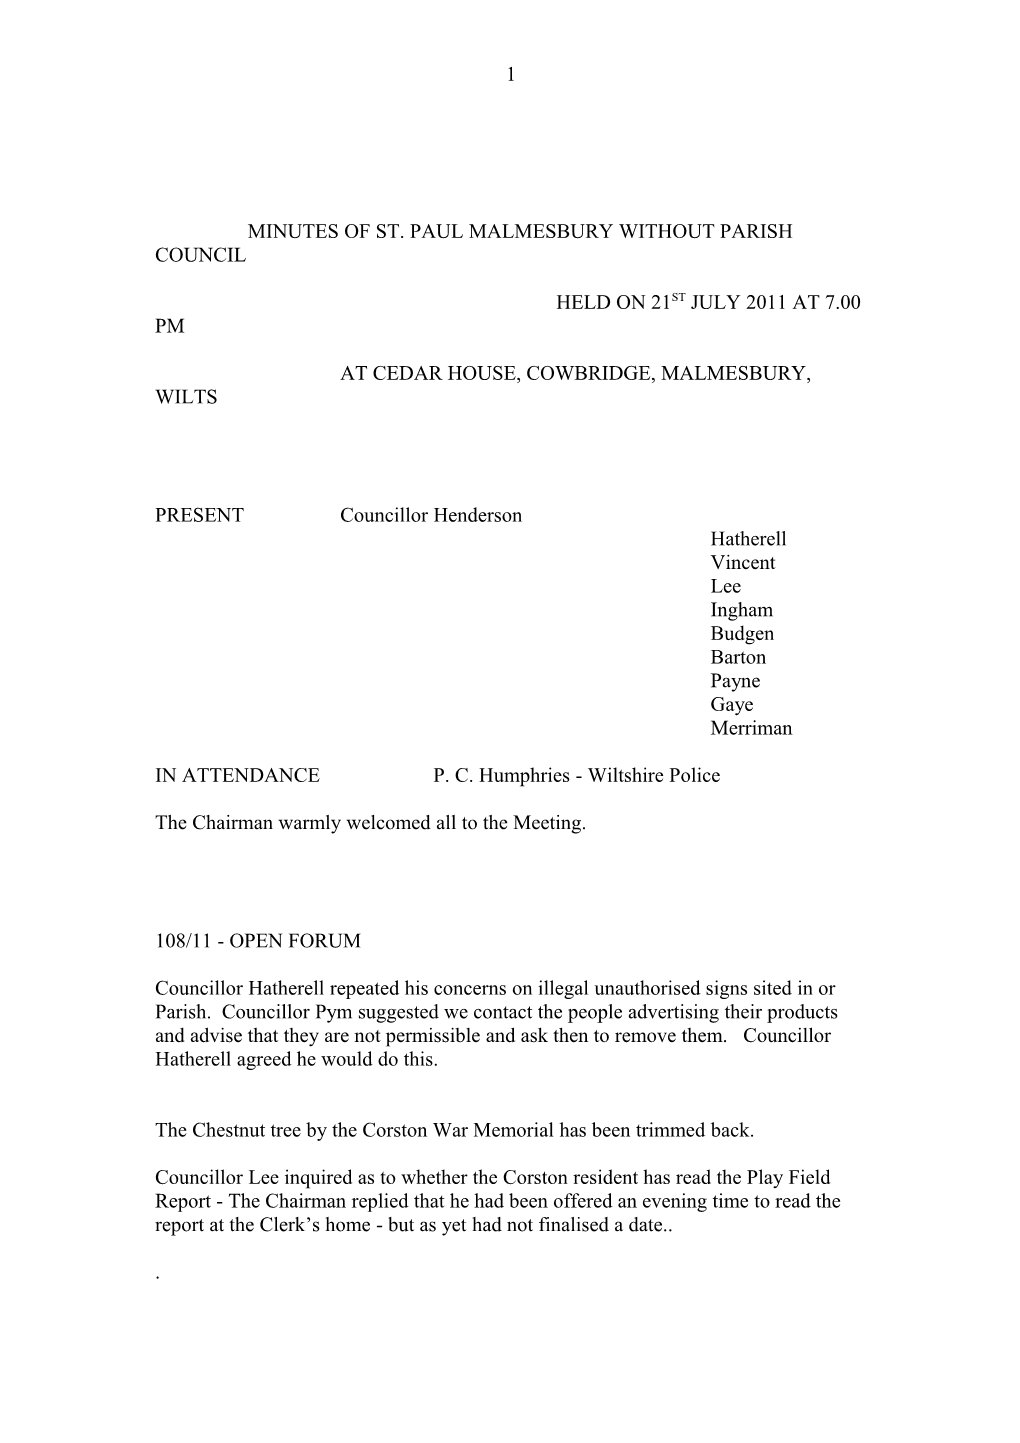 Minutes of St. Paul Malmesbury Without Parish Council